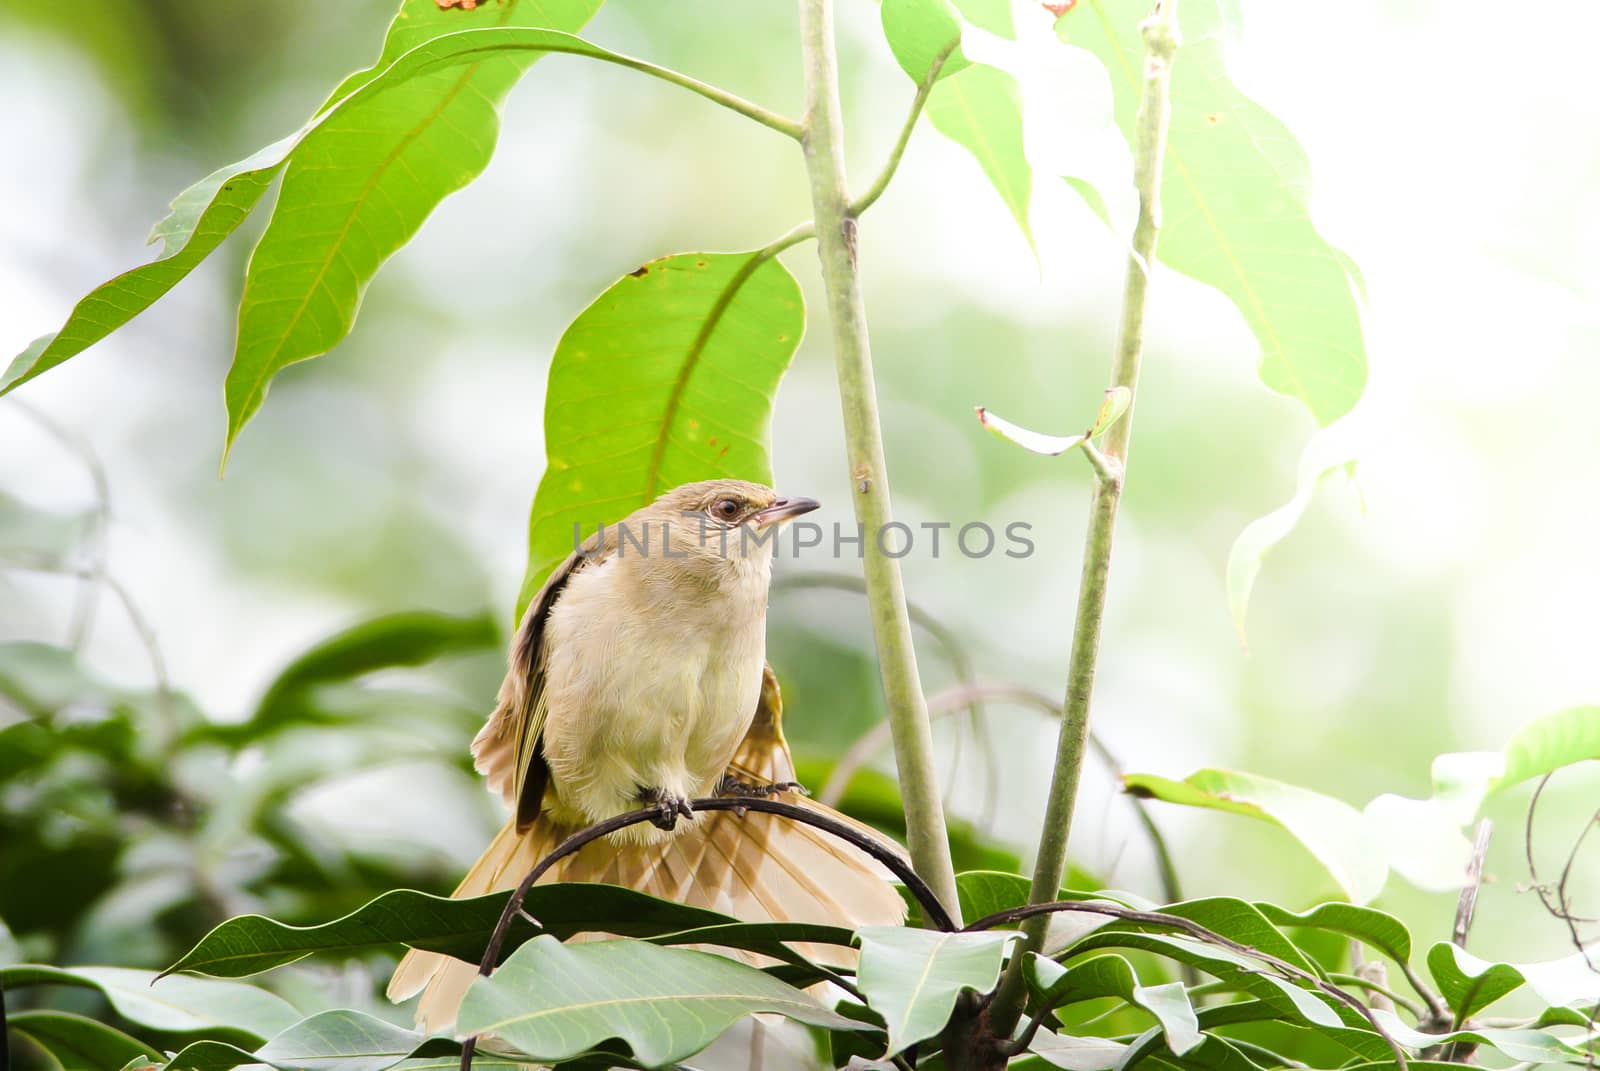 Streak-eared bulbul's stand​ing on branches​ in the forest. Bird's in the nature background.
